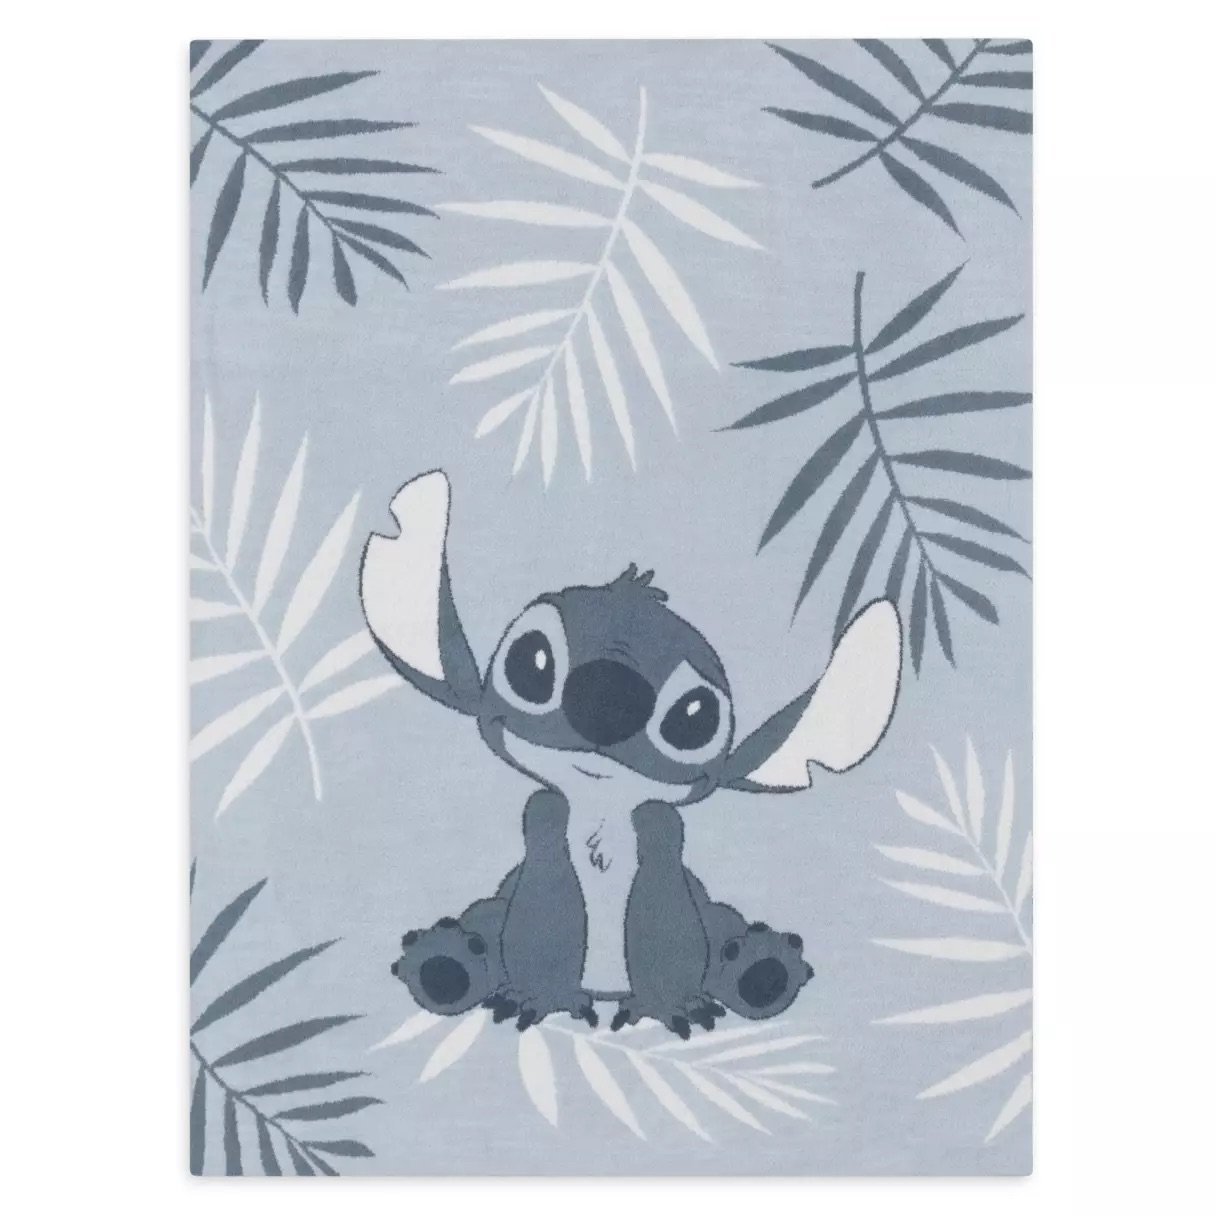 The Summer Stitch Collection on shopDisney — EXTRA MAGIC MINUTES